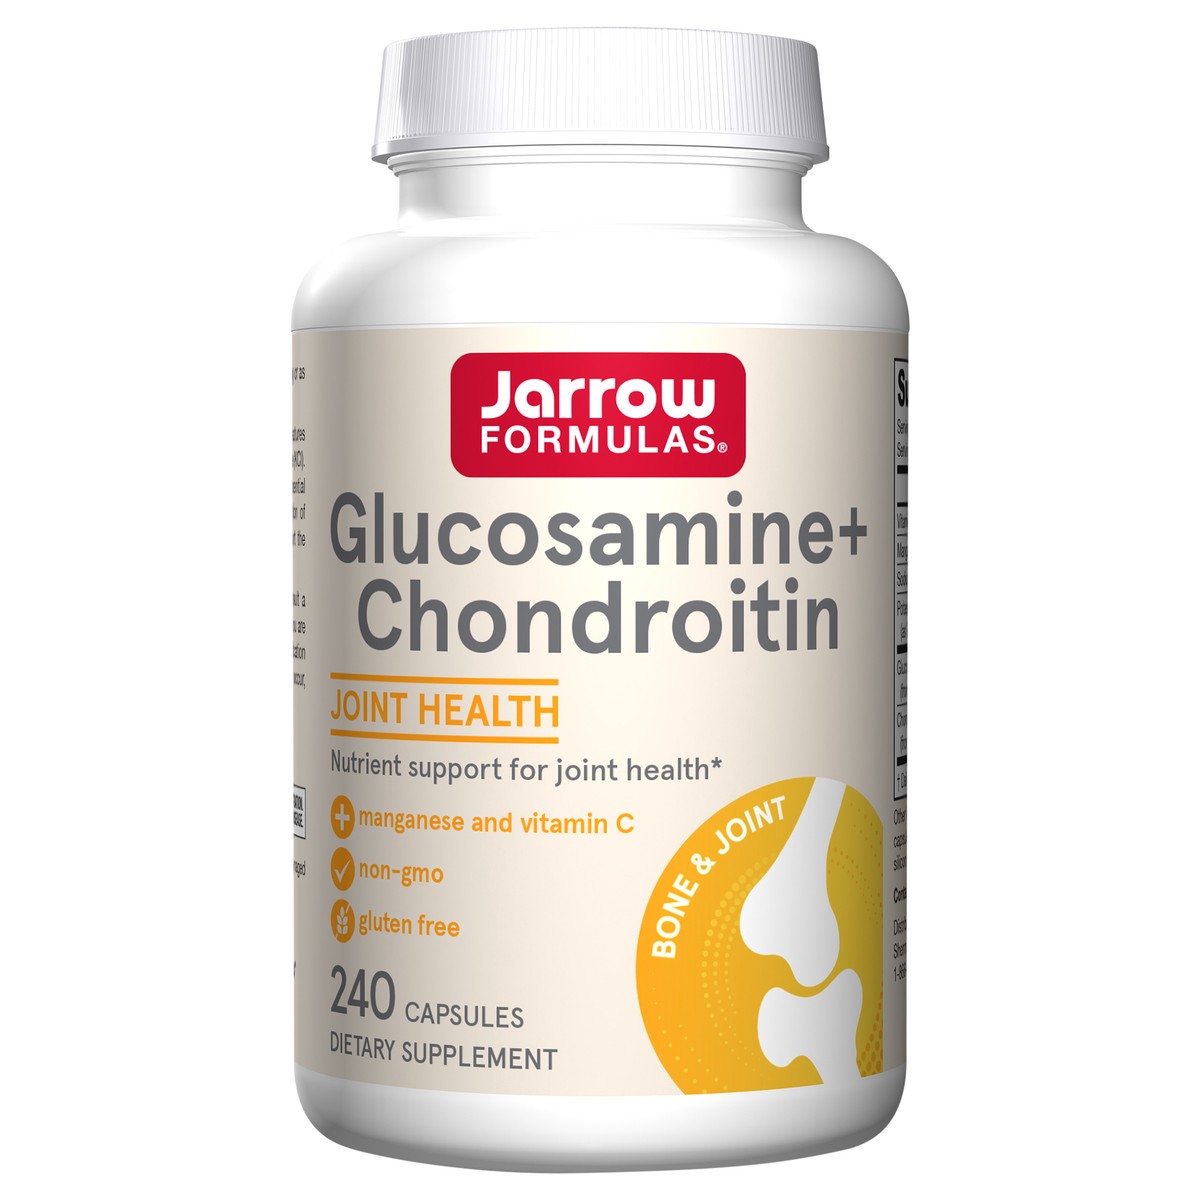 slide 5 of 5, Jarrow Formulas Glucosamine + Chondroitin - 240 Capsules - Nutrient Support - Dietary Supplement for Joint Health - With Vitamin C & Manganese - 60 Servings, 240 ct